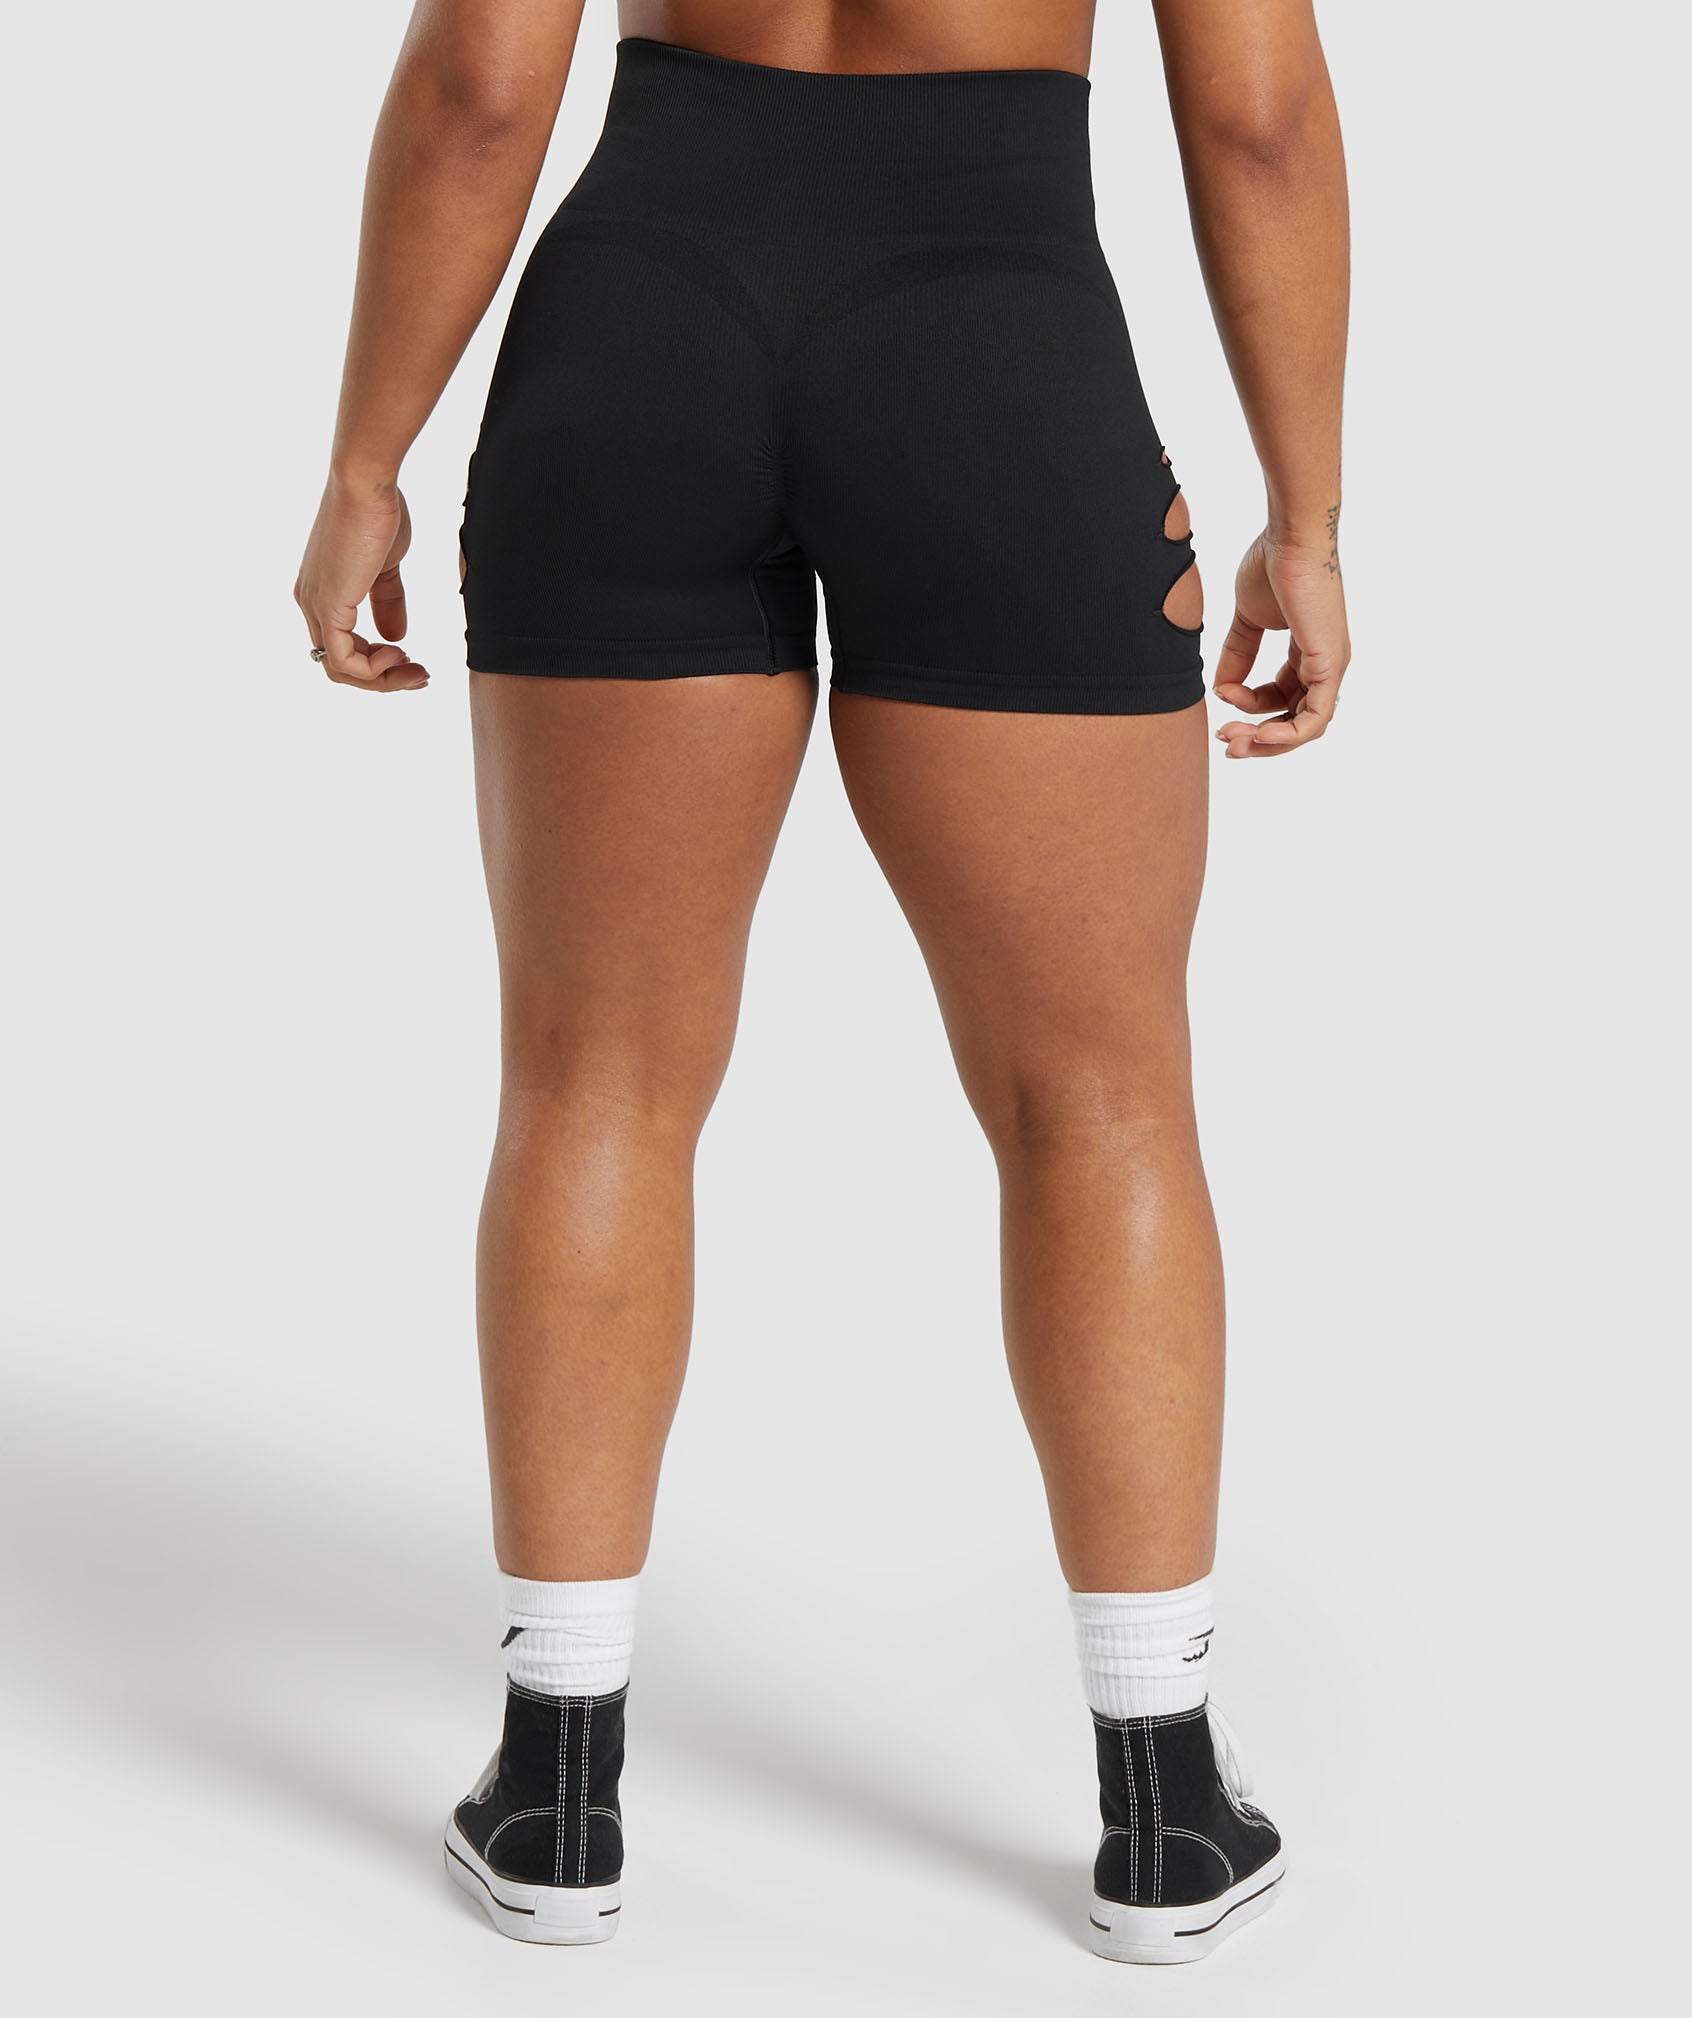 Gains Seamless Ripped Shorts in Black - view 3